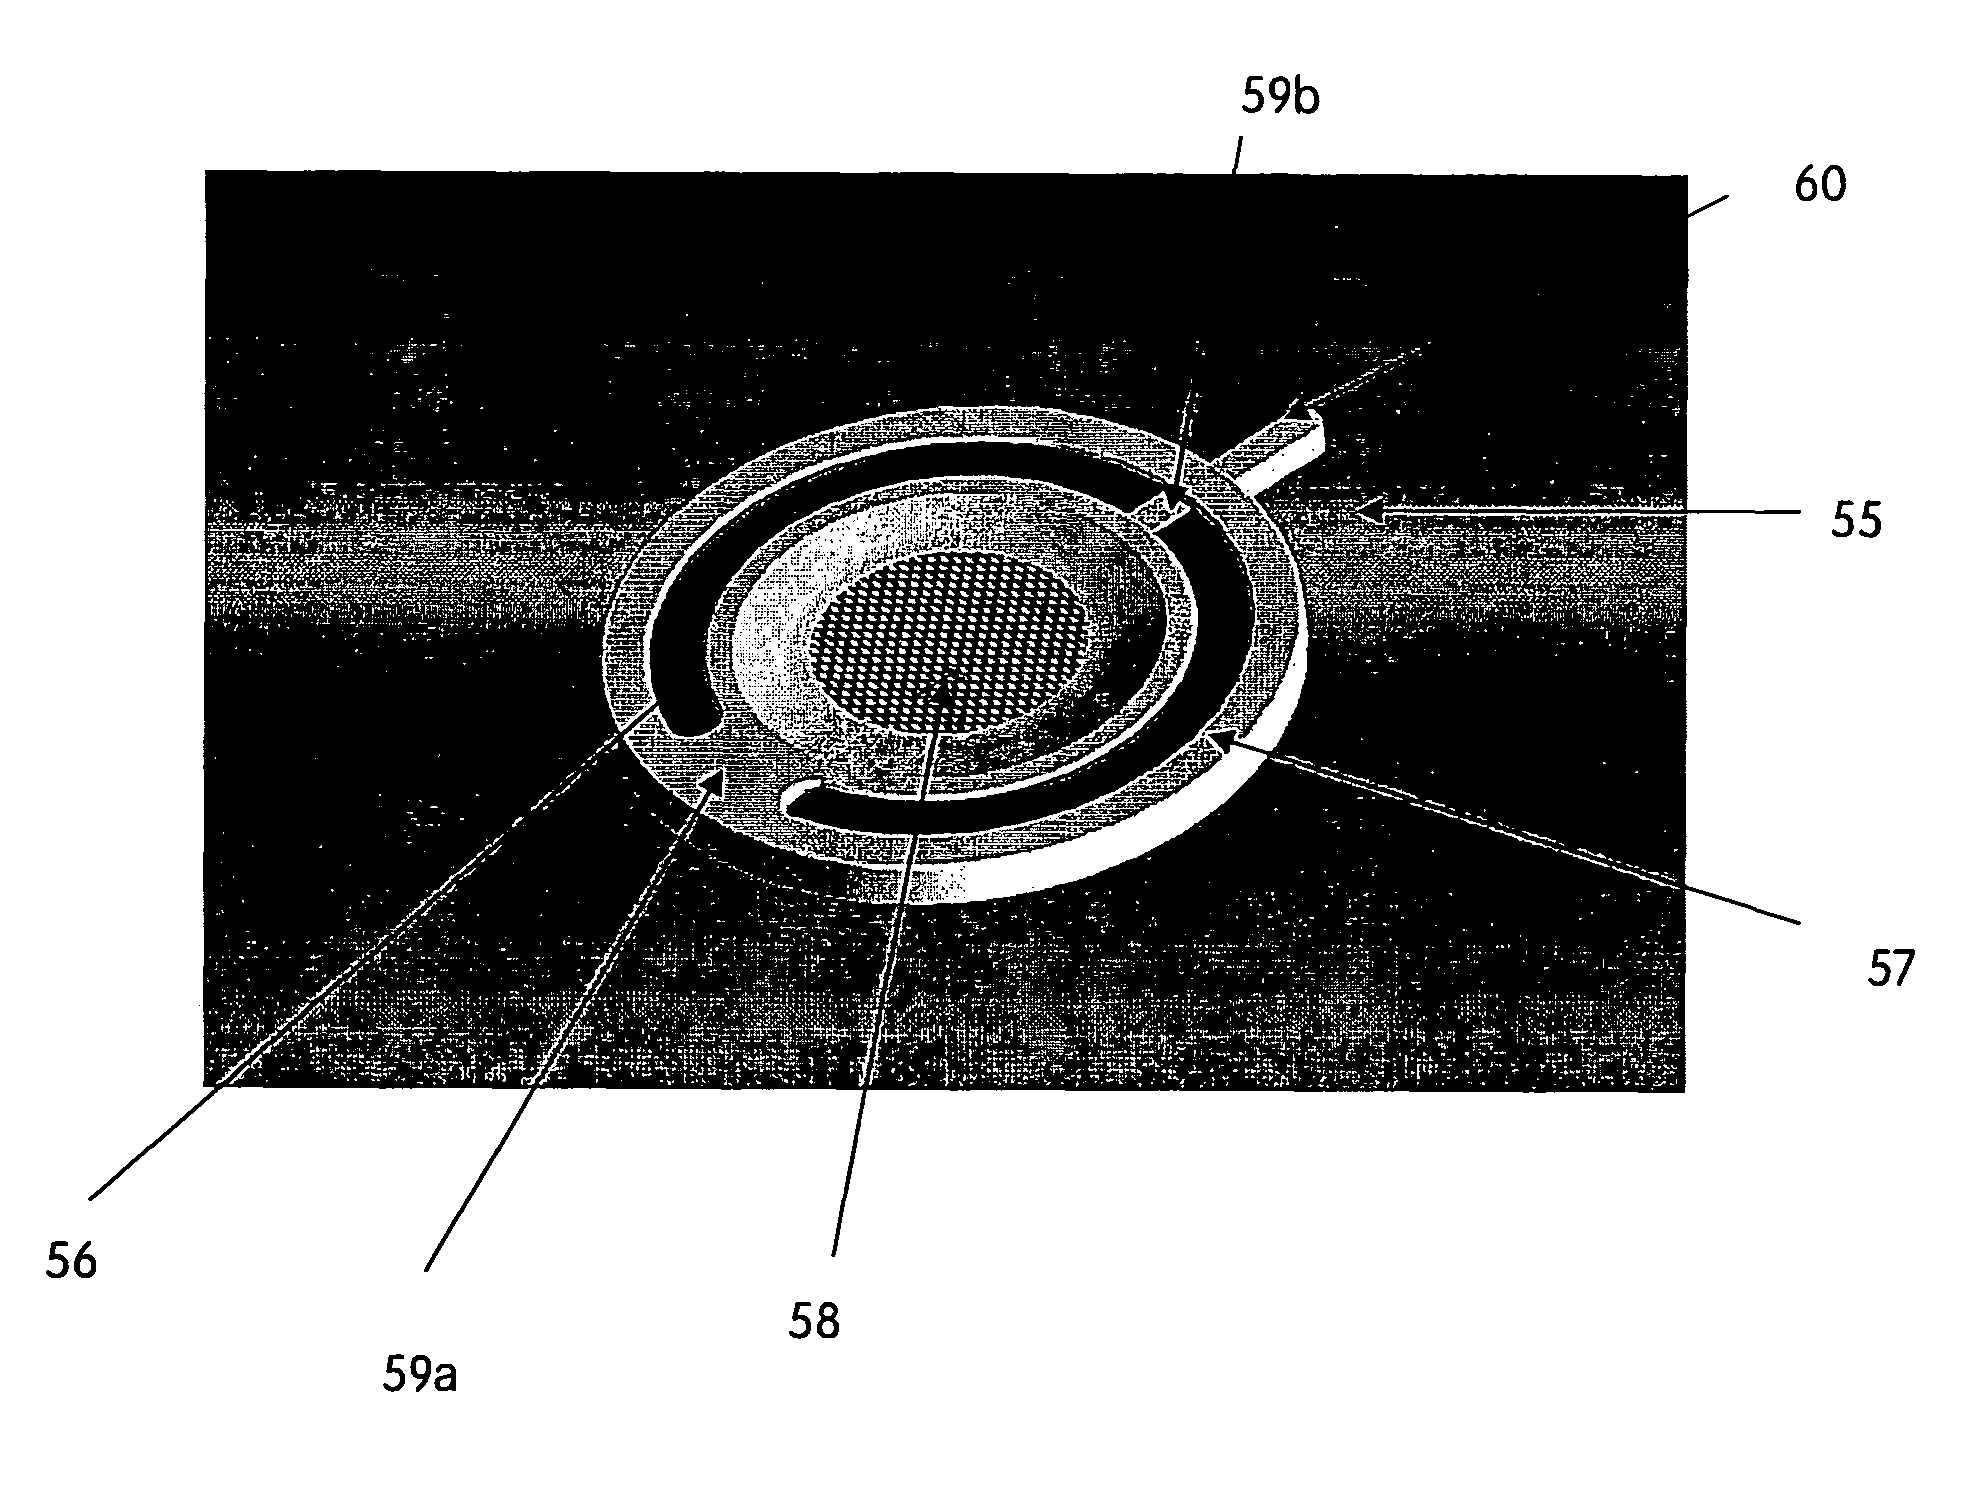 Apparatus and method for filter cleaning by ultrasound, backwashing and filter movement during the filtration of biological samples